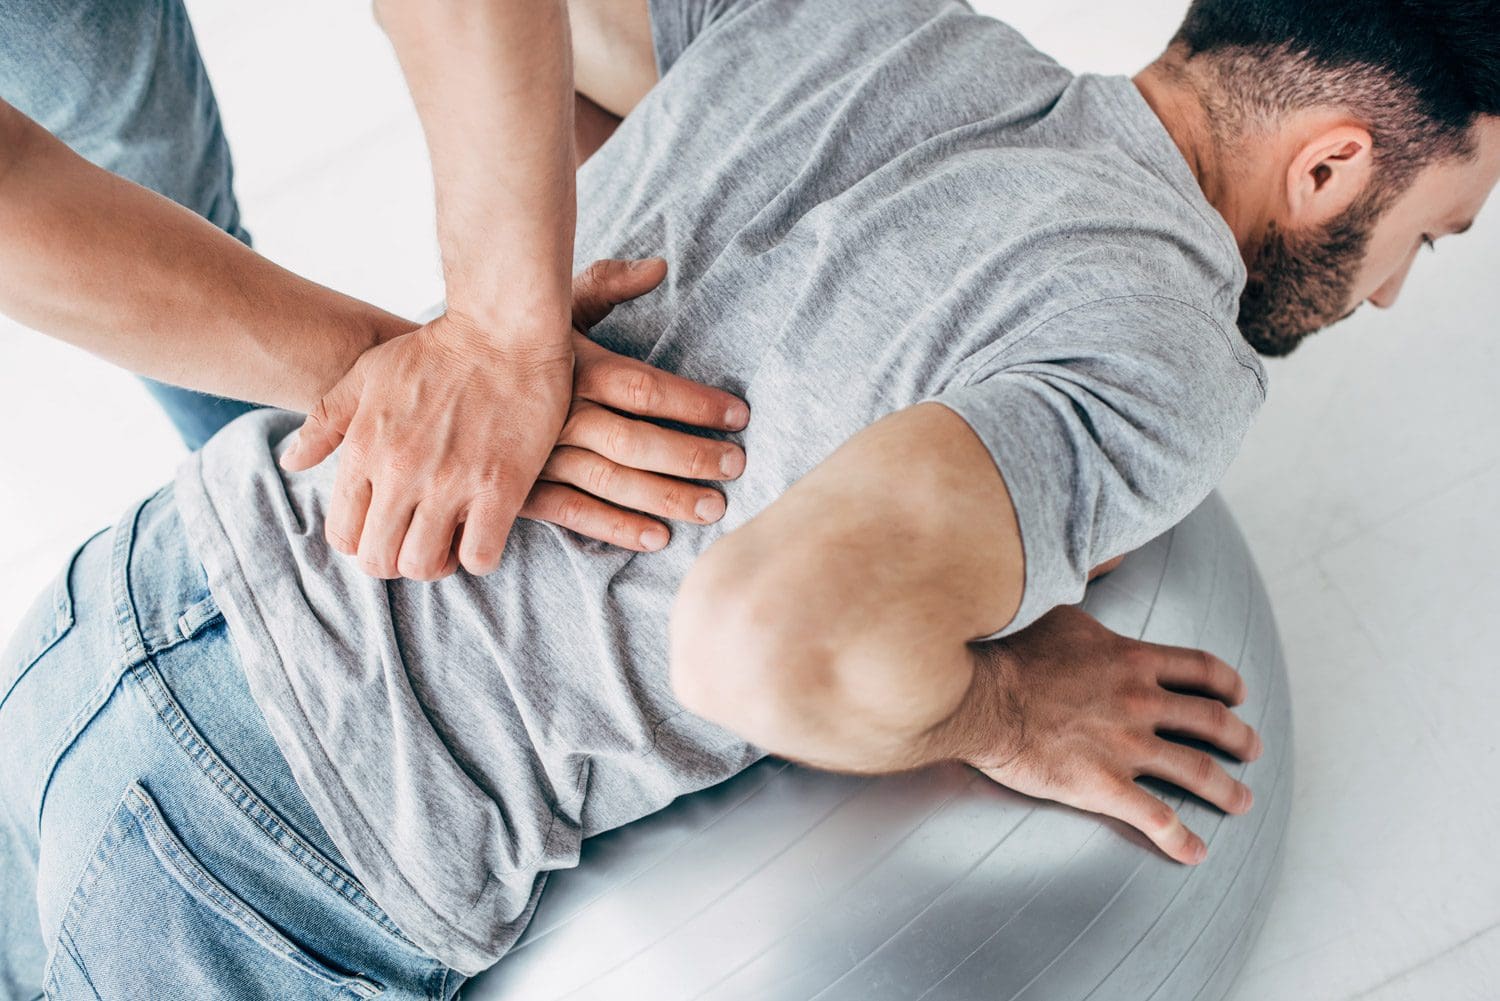 A Beaverton Chiropractor administers an adjustment to alleviate a man's back pain.